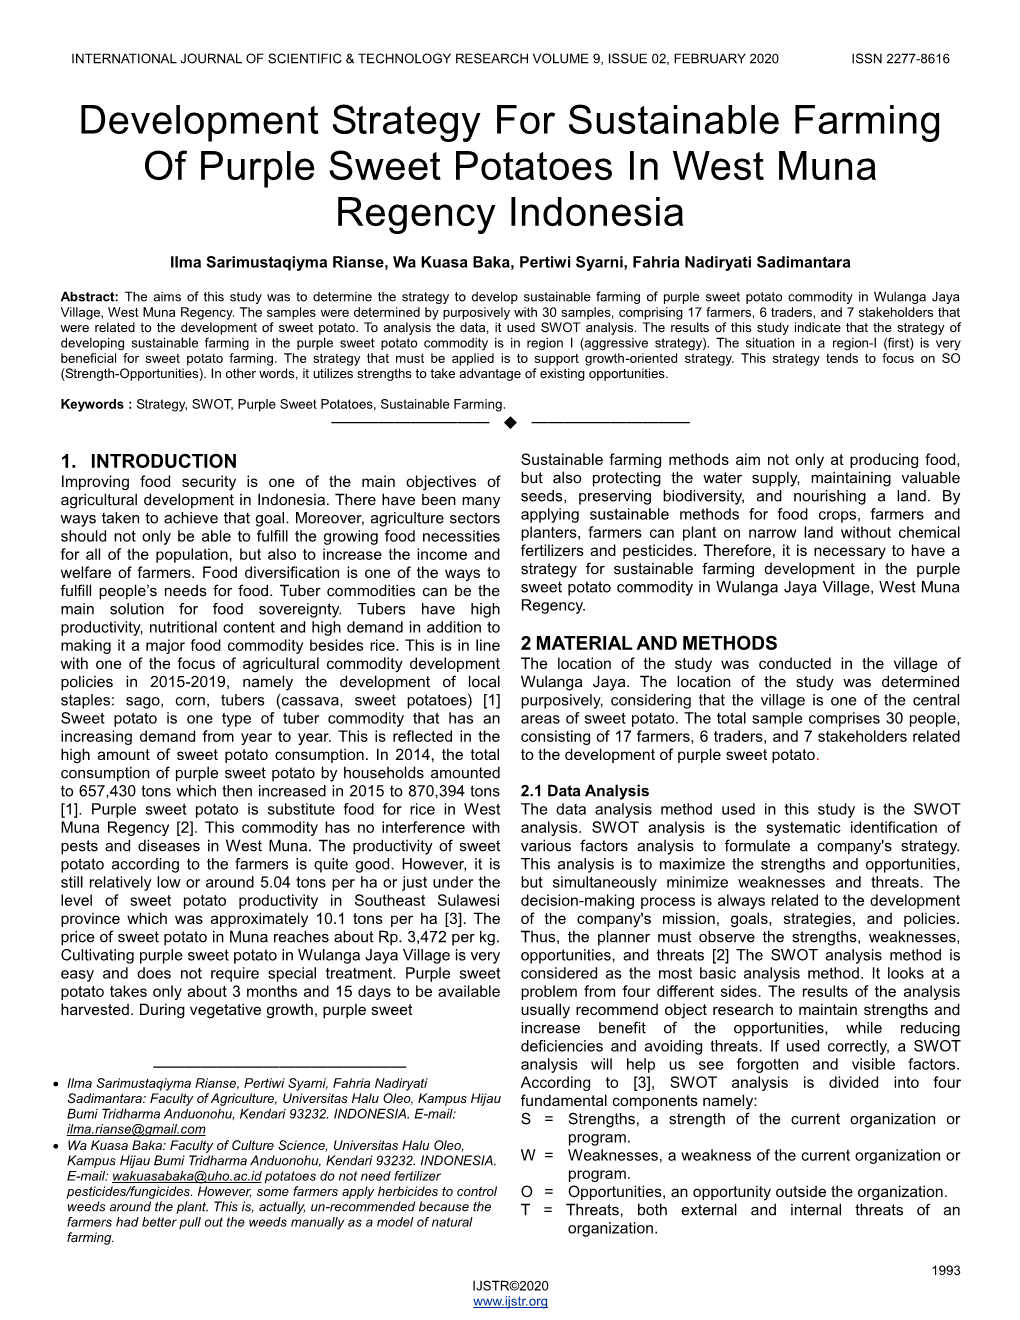 Development Strategy for Sustainable Farming of Purple Sweet Potatoes in West Muna Regency Indonesia